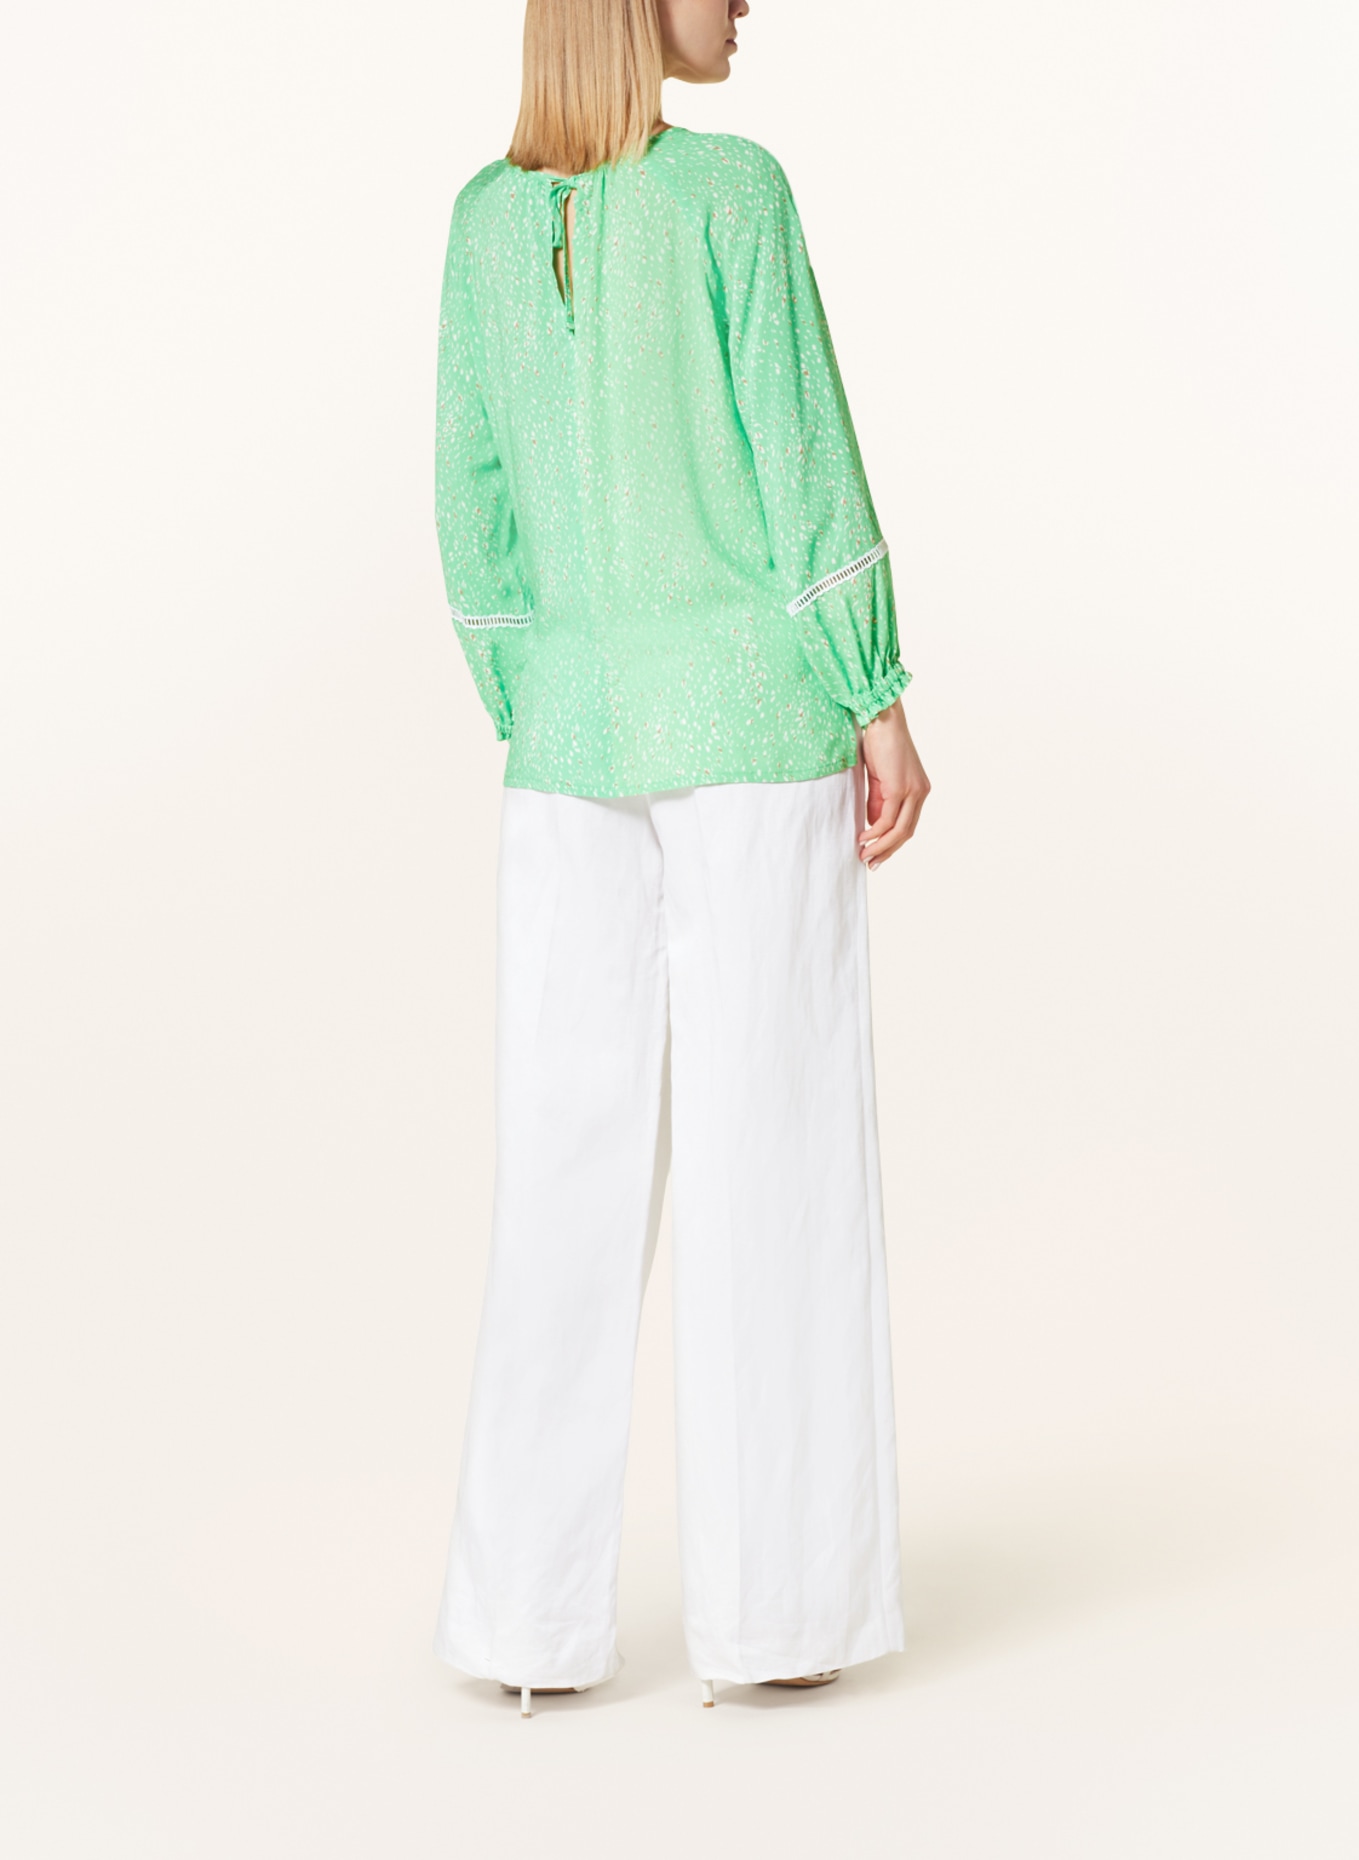 RIANI Shirt blouse with broderie anglaise, Color: LIGHT GREEN/ TAUPE/ WHITE (Image 3)